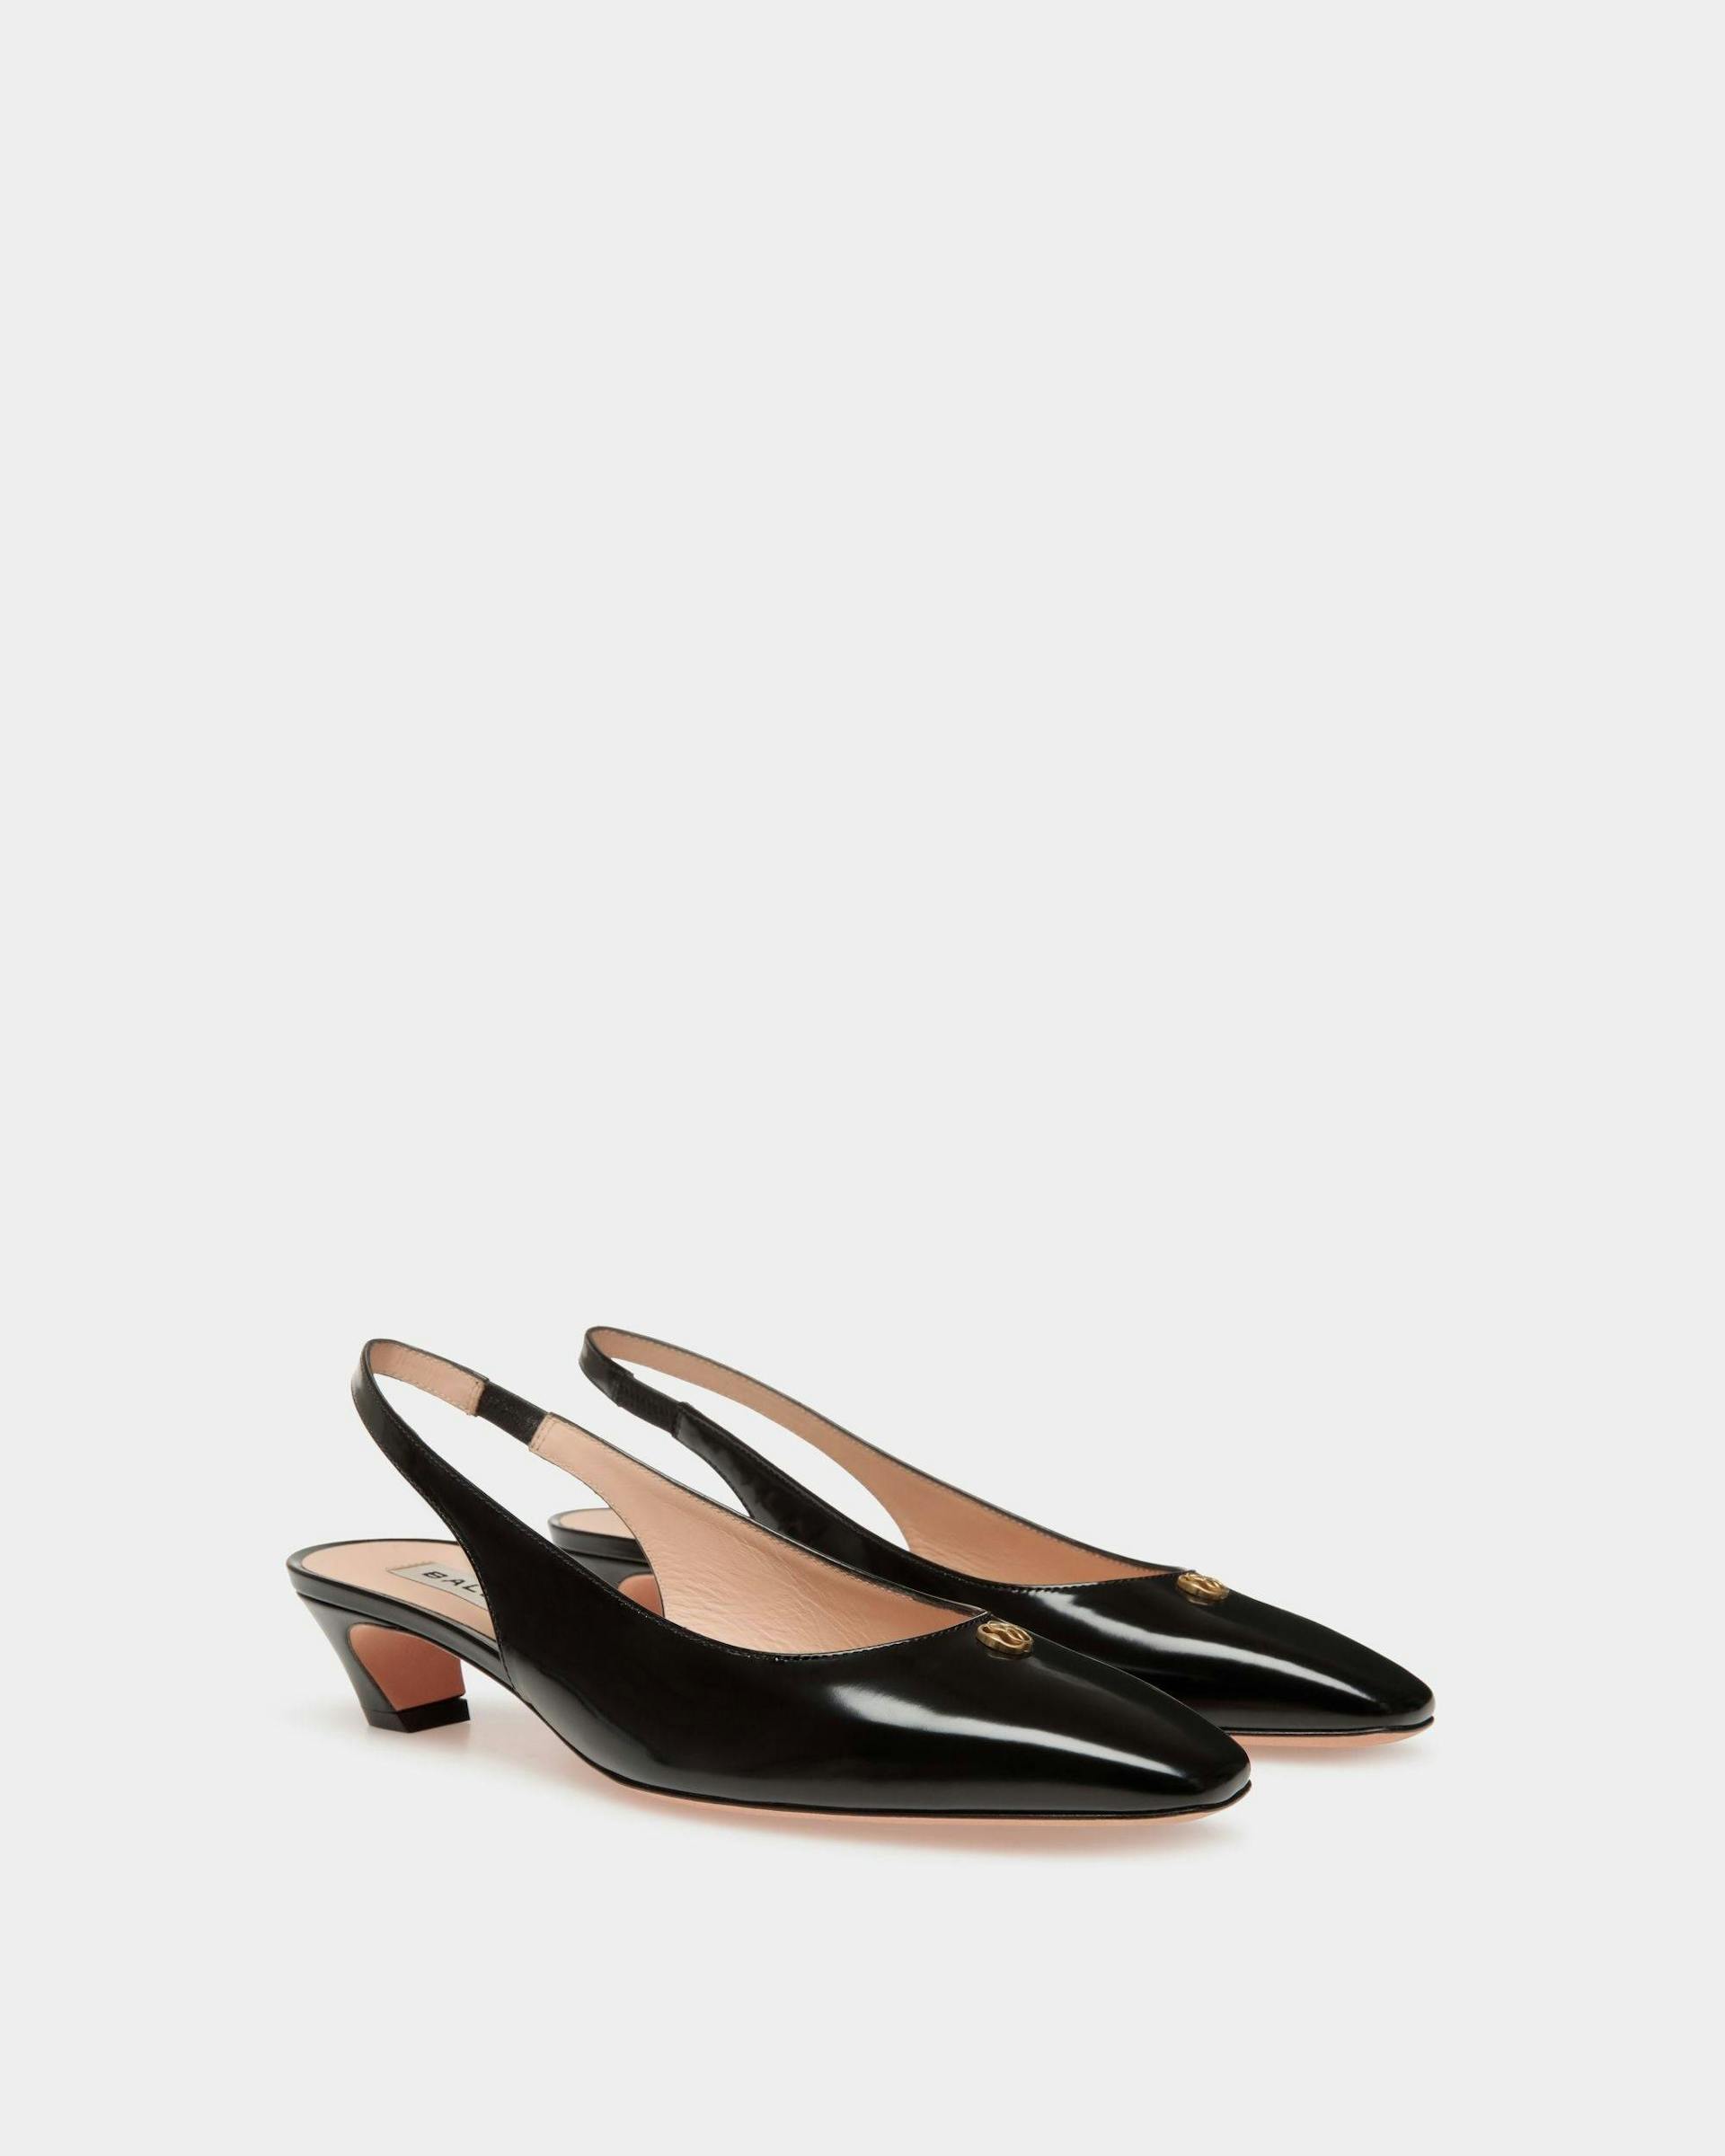 Women's Sylt Slingback Pump in Black Leather | Bally | Still Life 3/4 Front